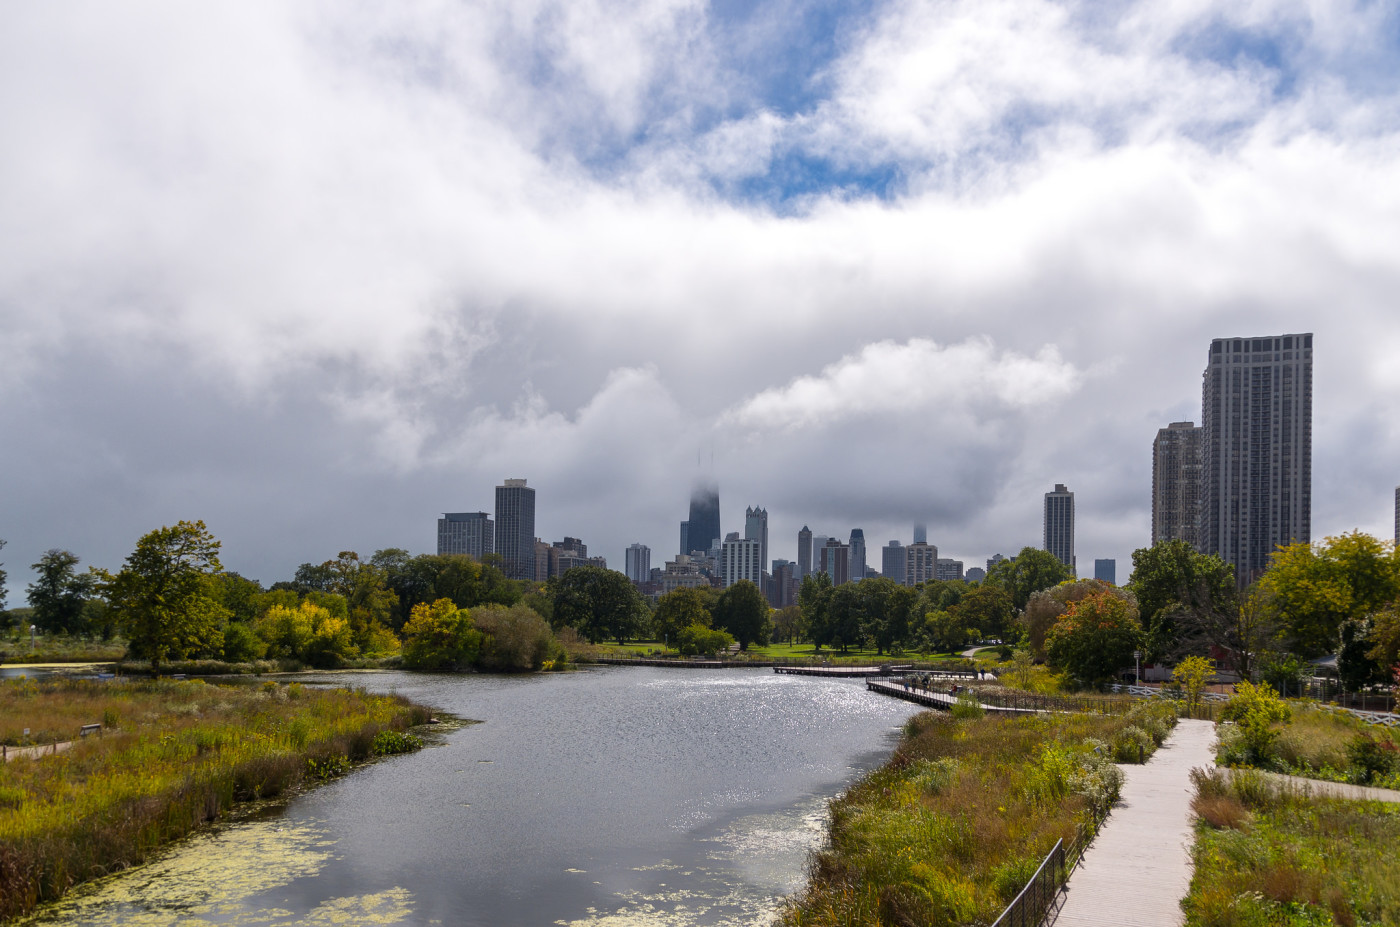 Chicago Skyline from Lincoln Park Zoo. Photo by Andrew Seaman via Flickr CC